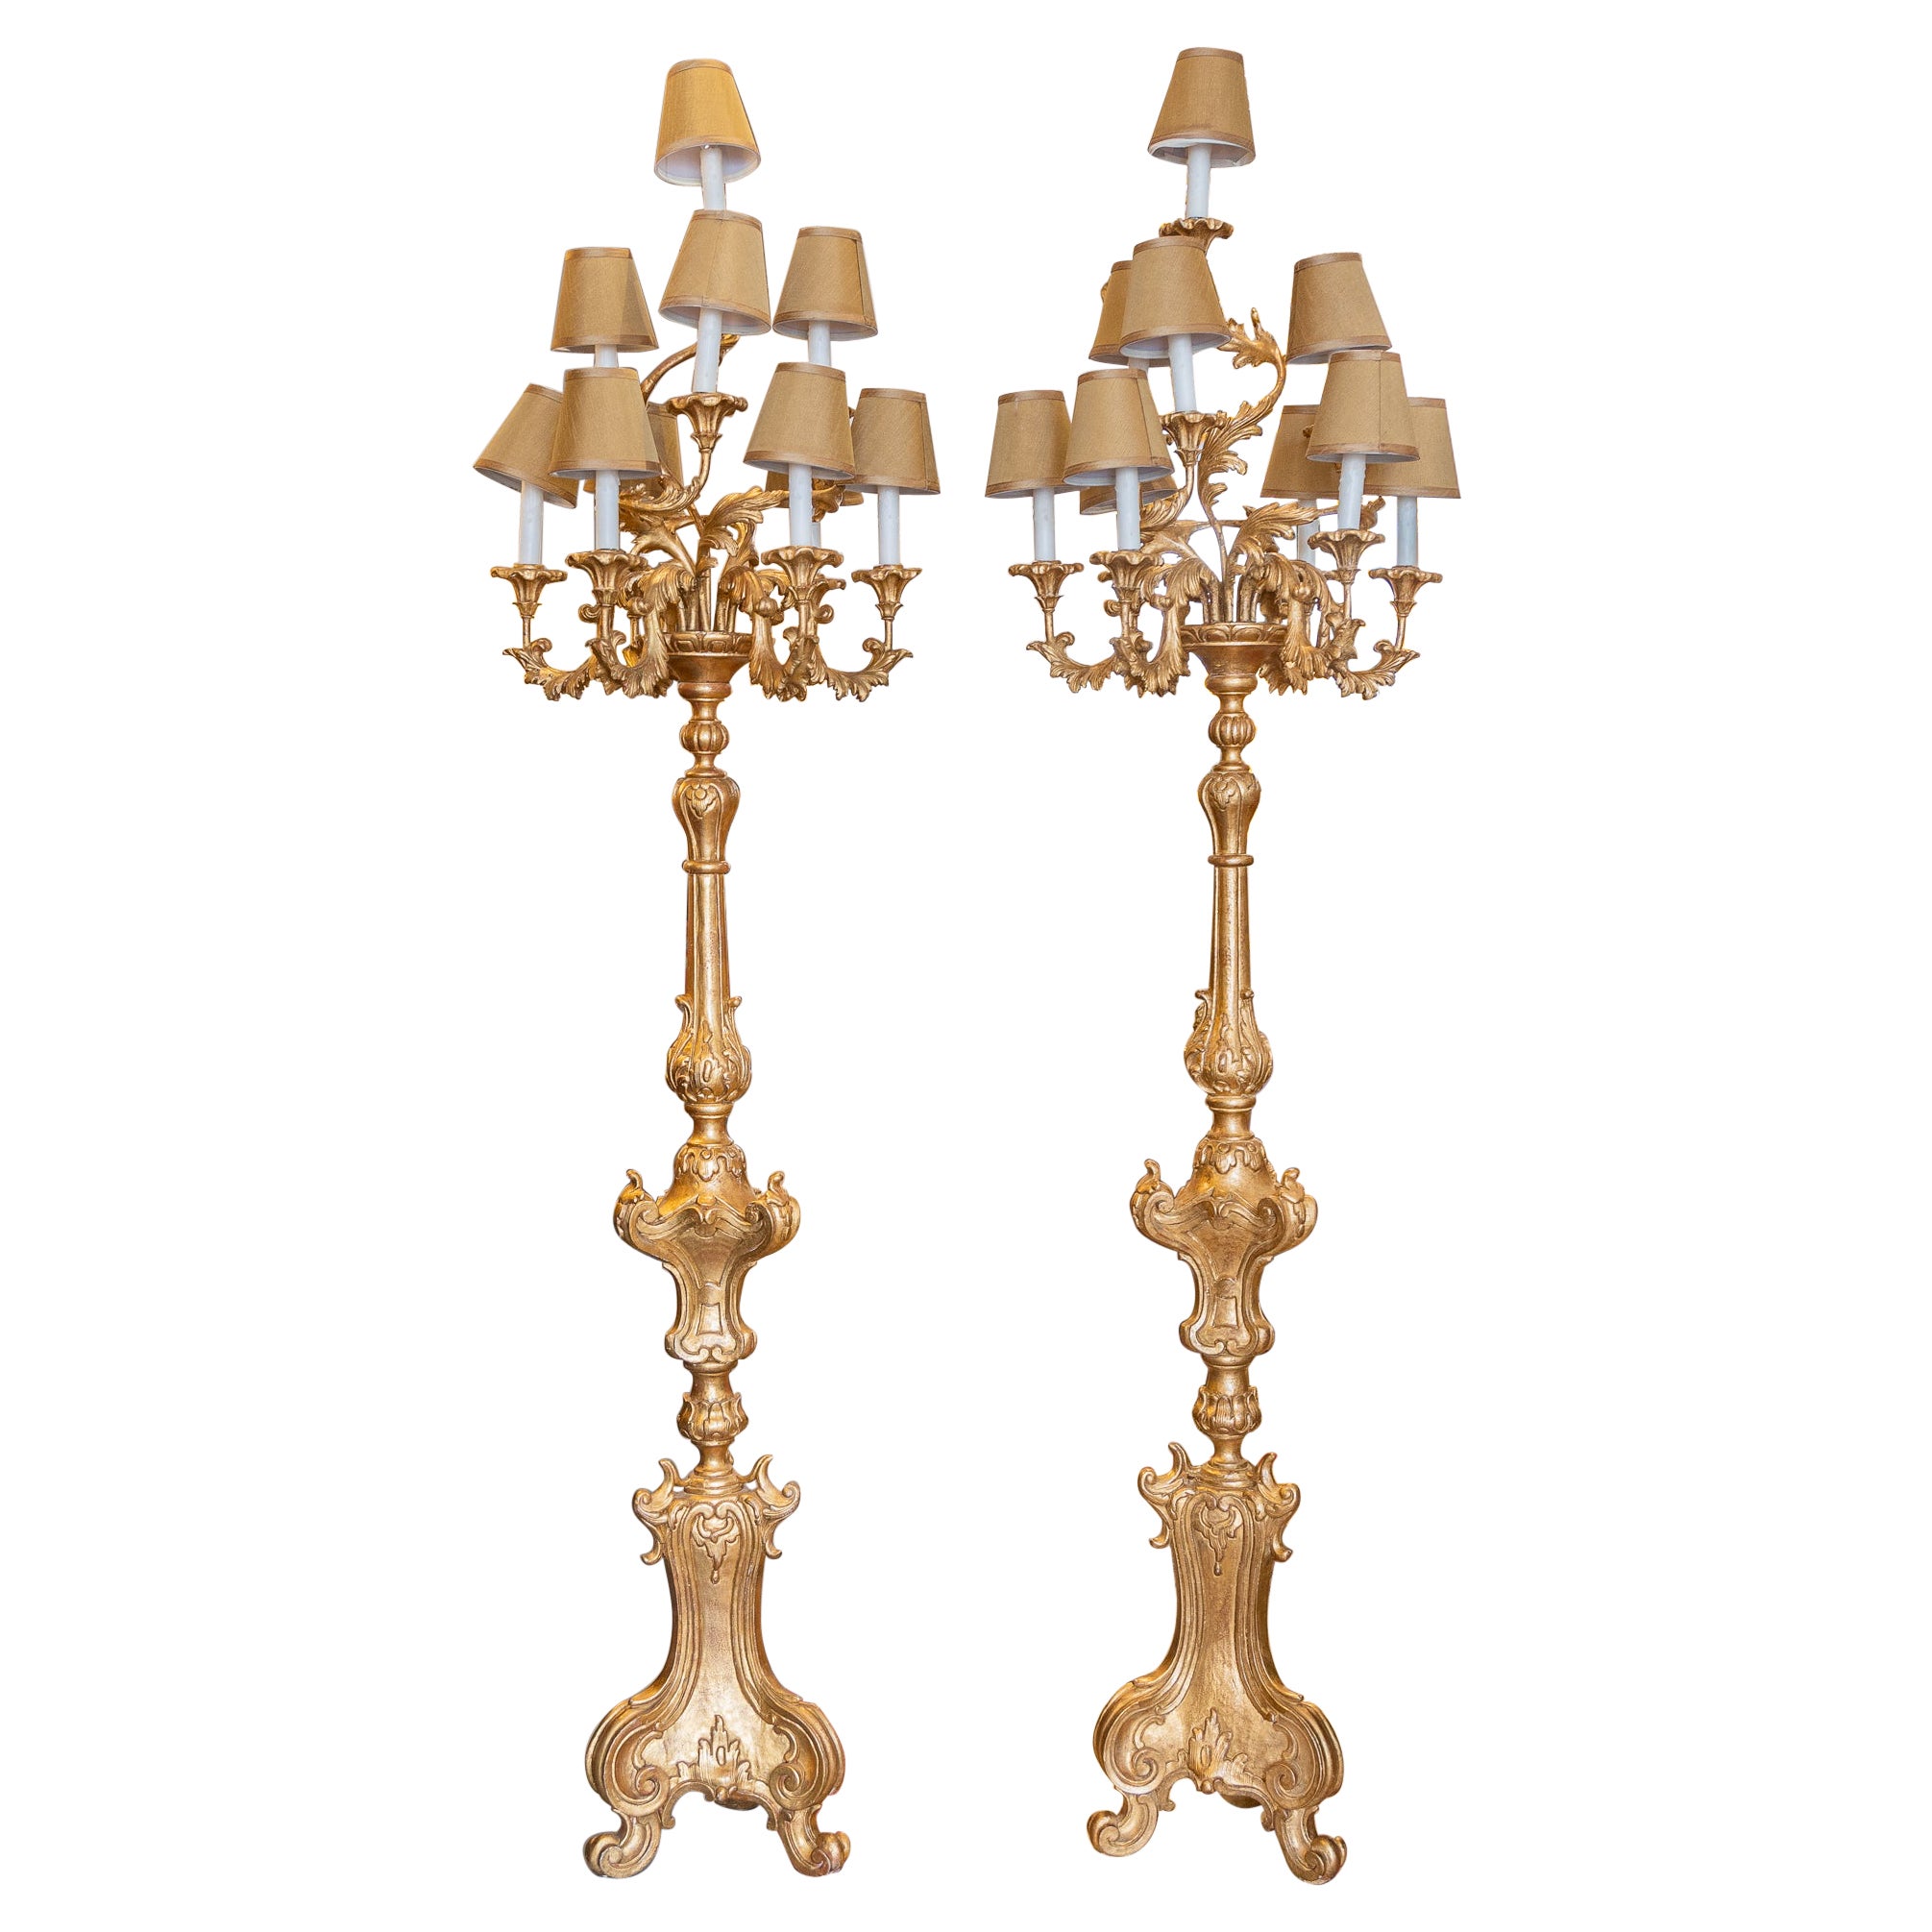 Fine Pair of Gilt Carved French Early 20th C Candelabra Floor Lamps 10 Lights For Sale